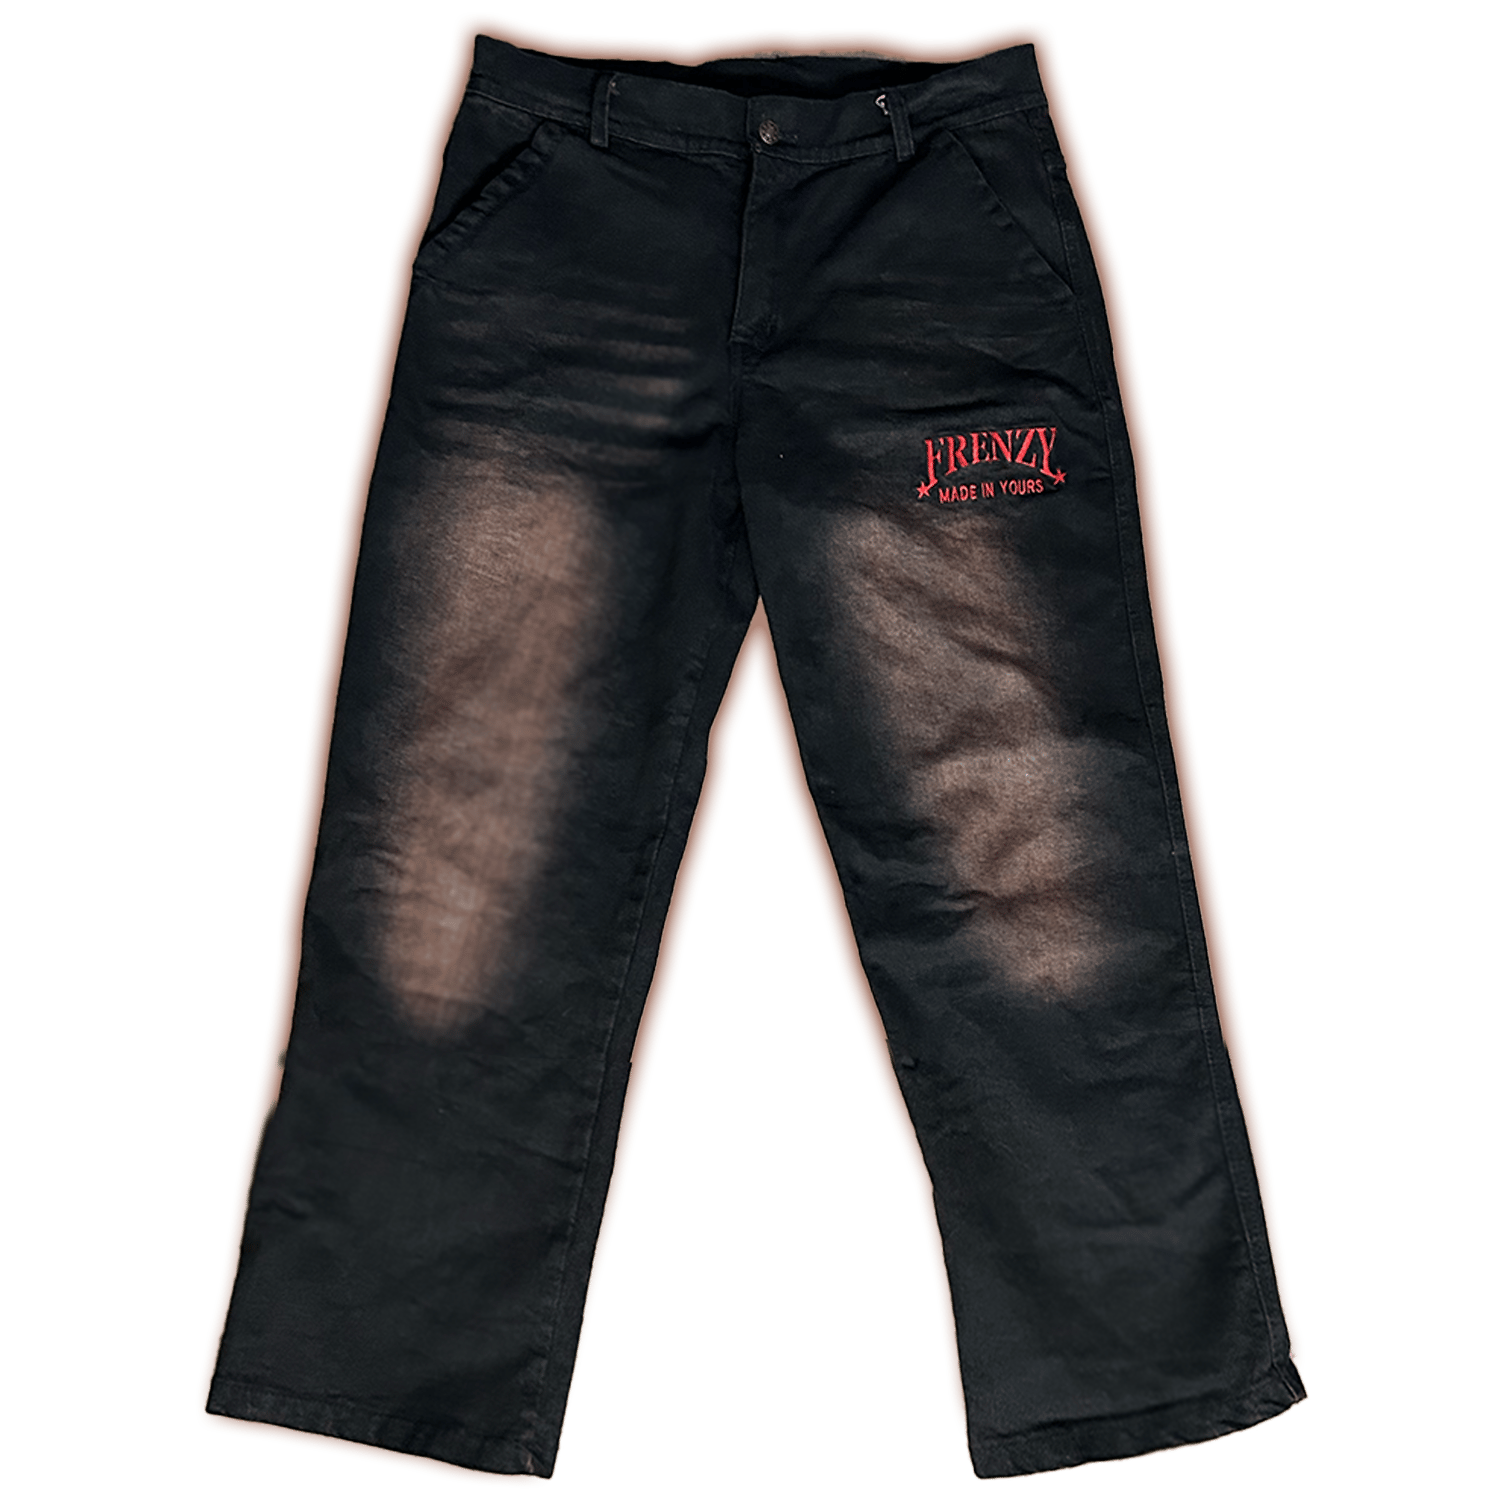 Stained Skate Jeans